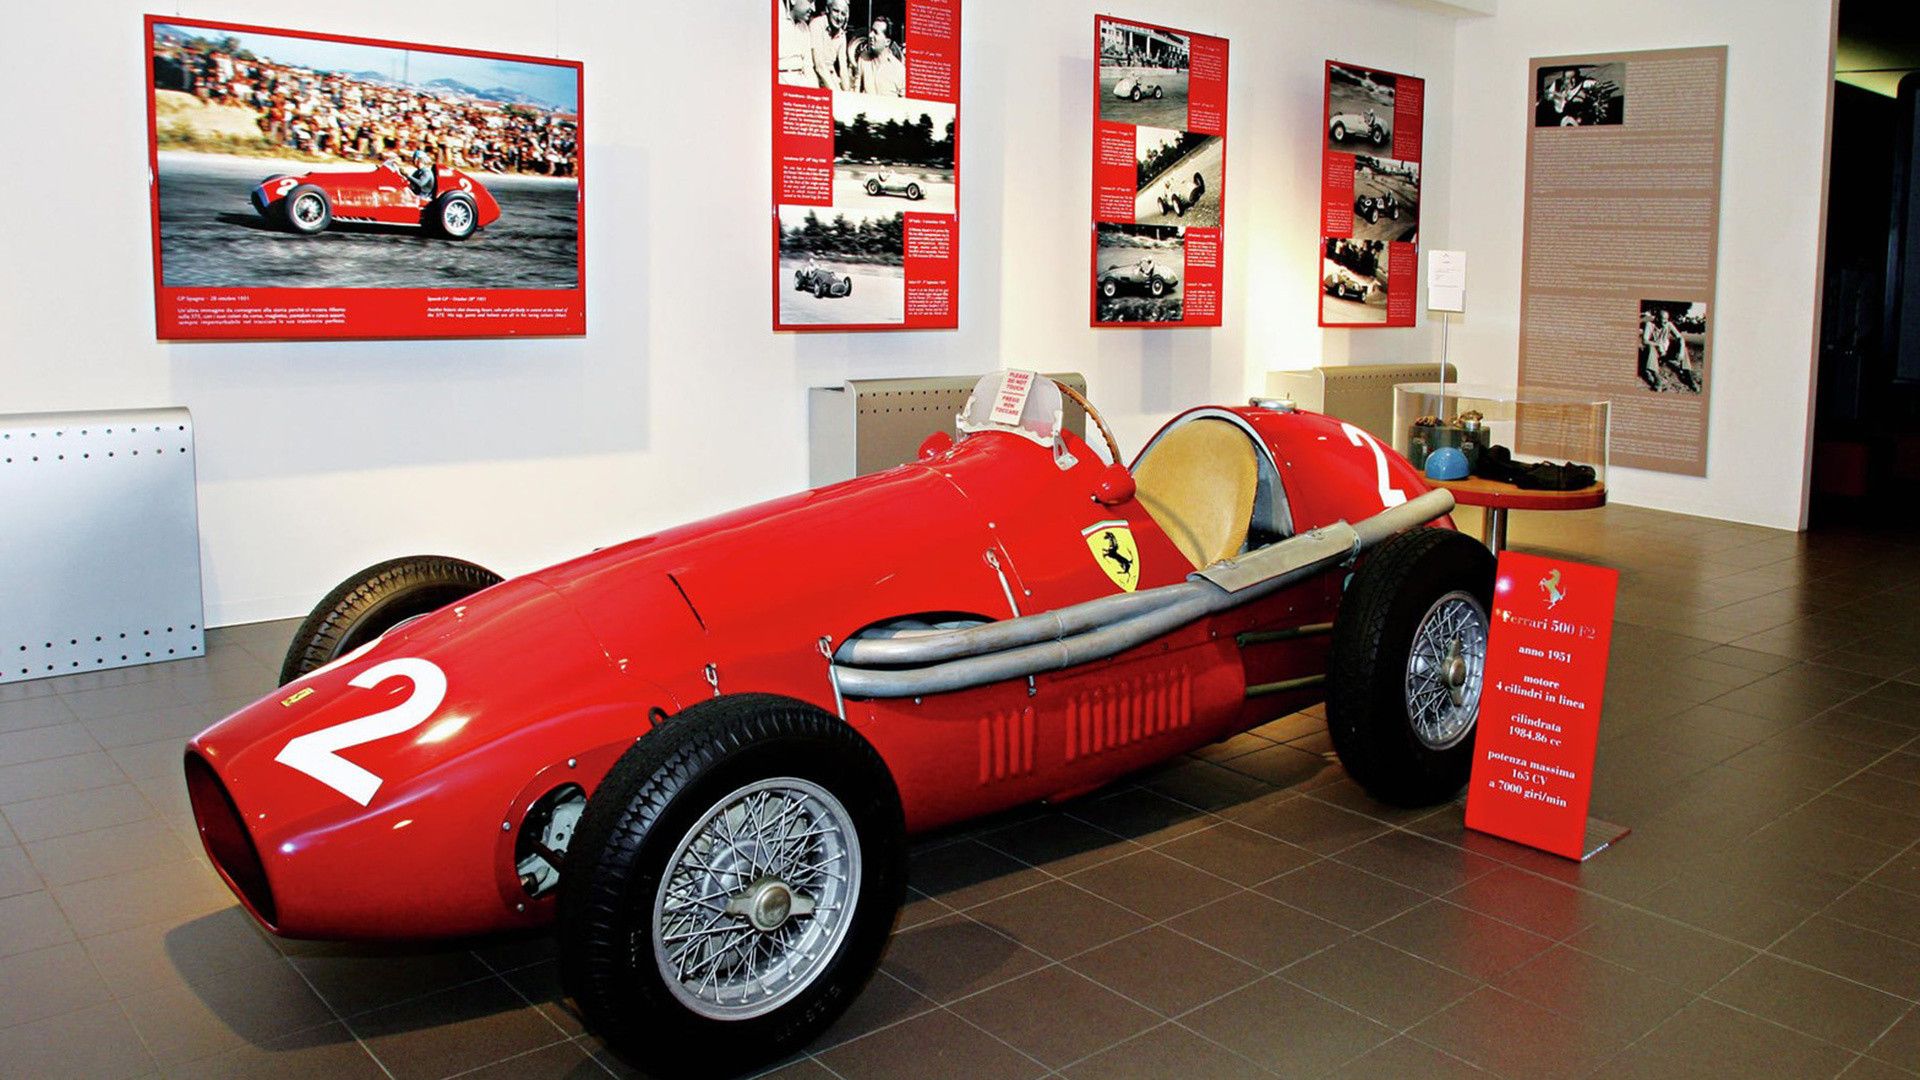 Iconic Race Car: How The Ferrari 500 F2 Paved The Way For 